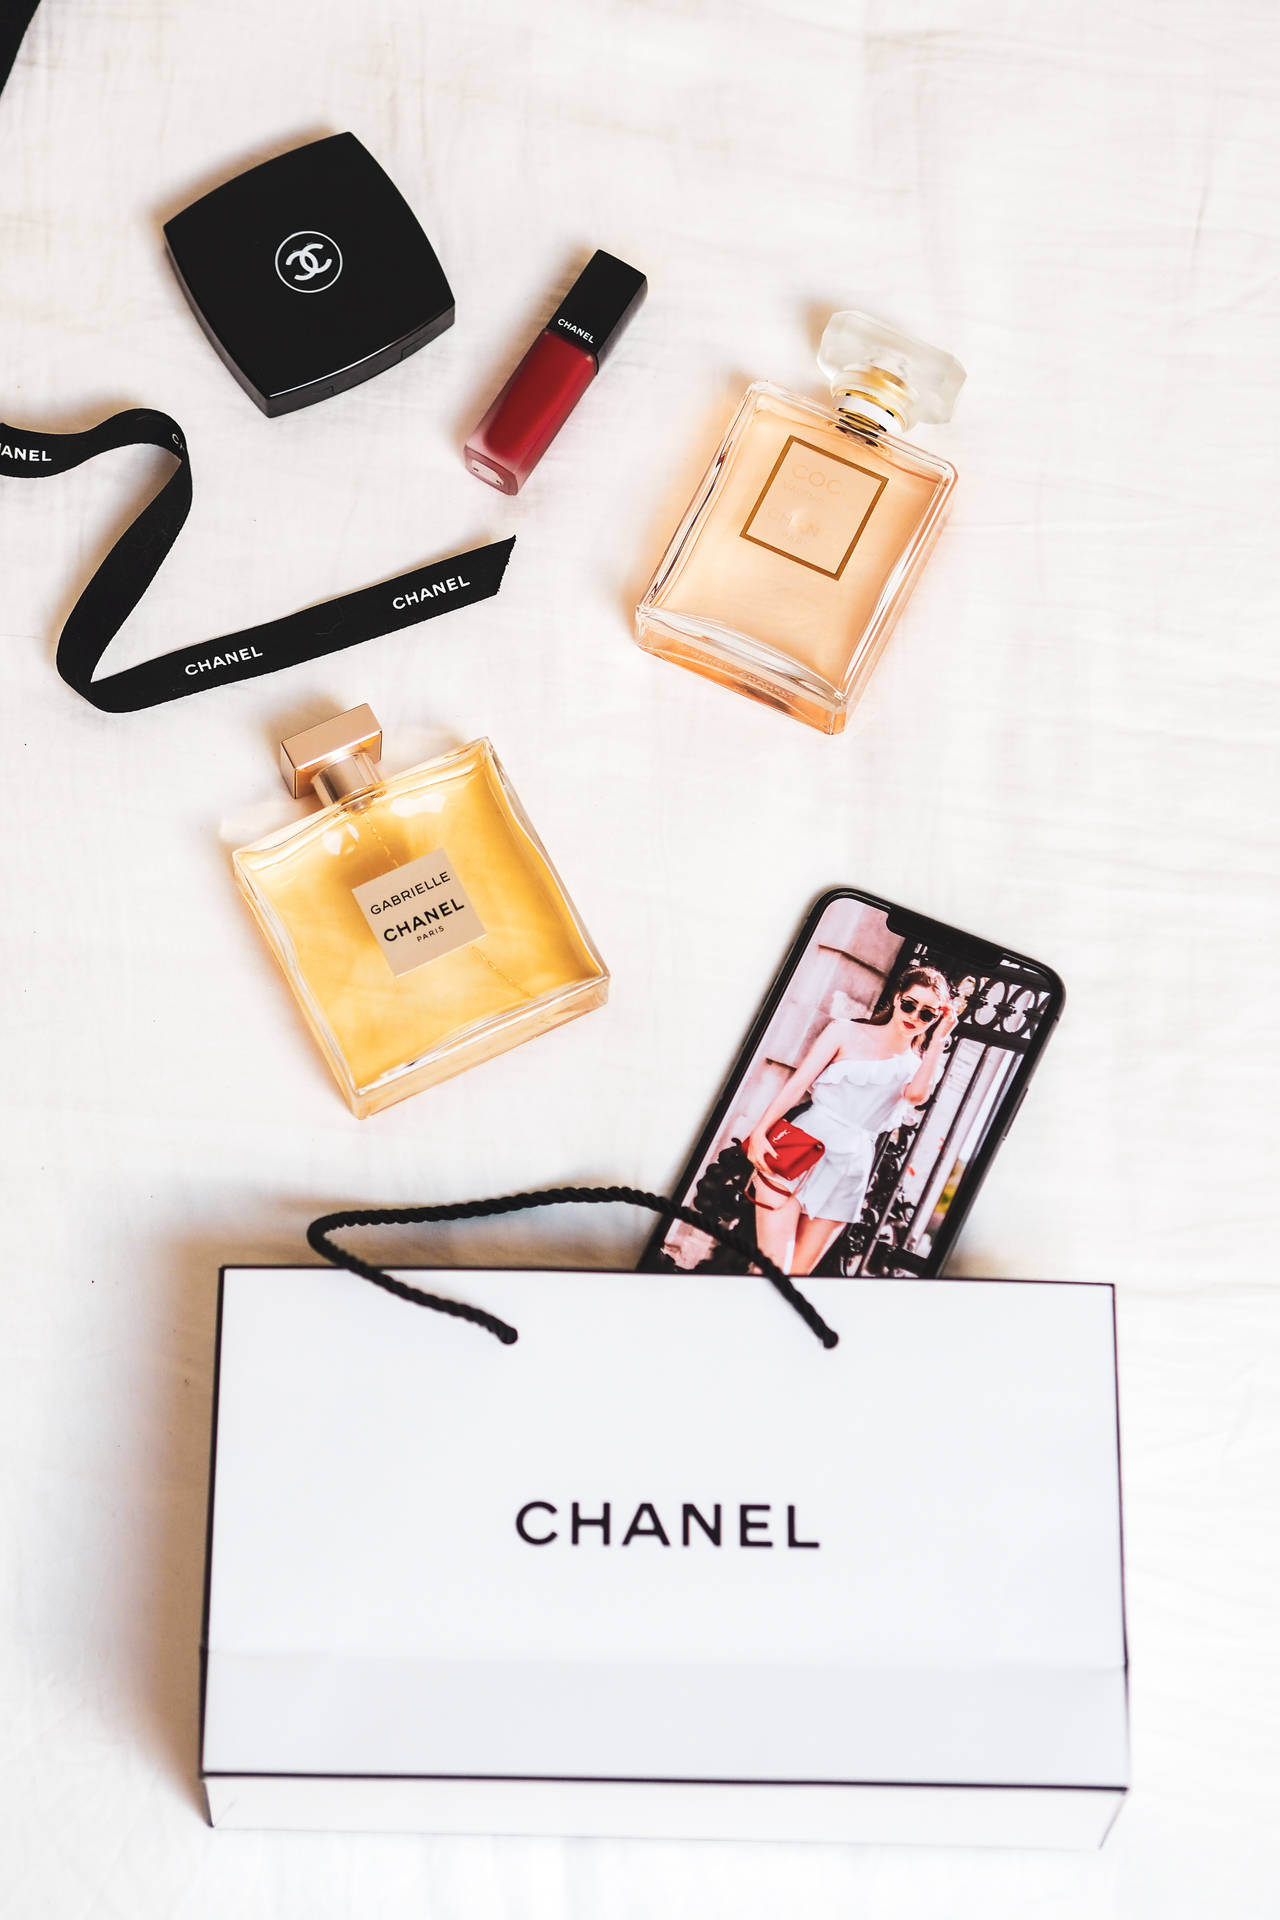 Chanel Aesthetic Products On Bed Background